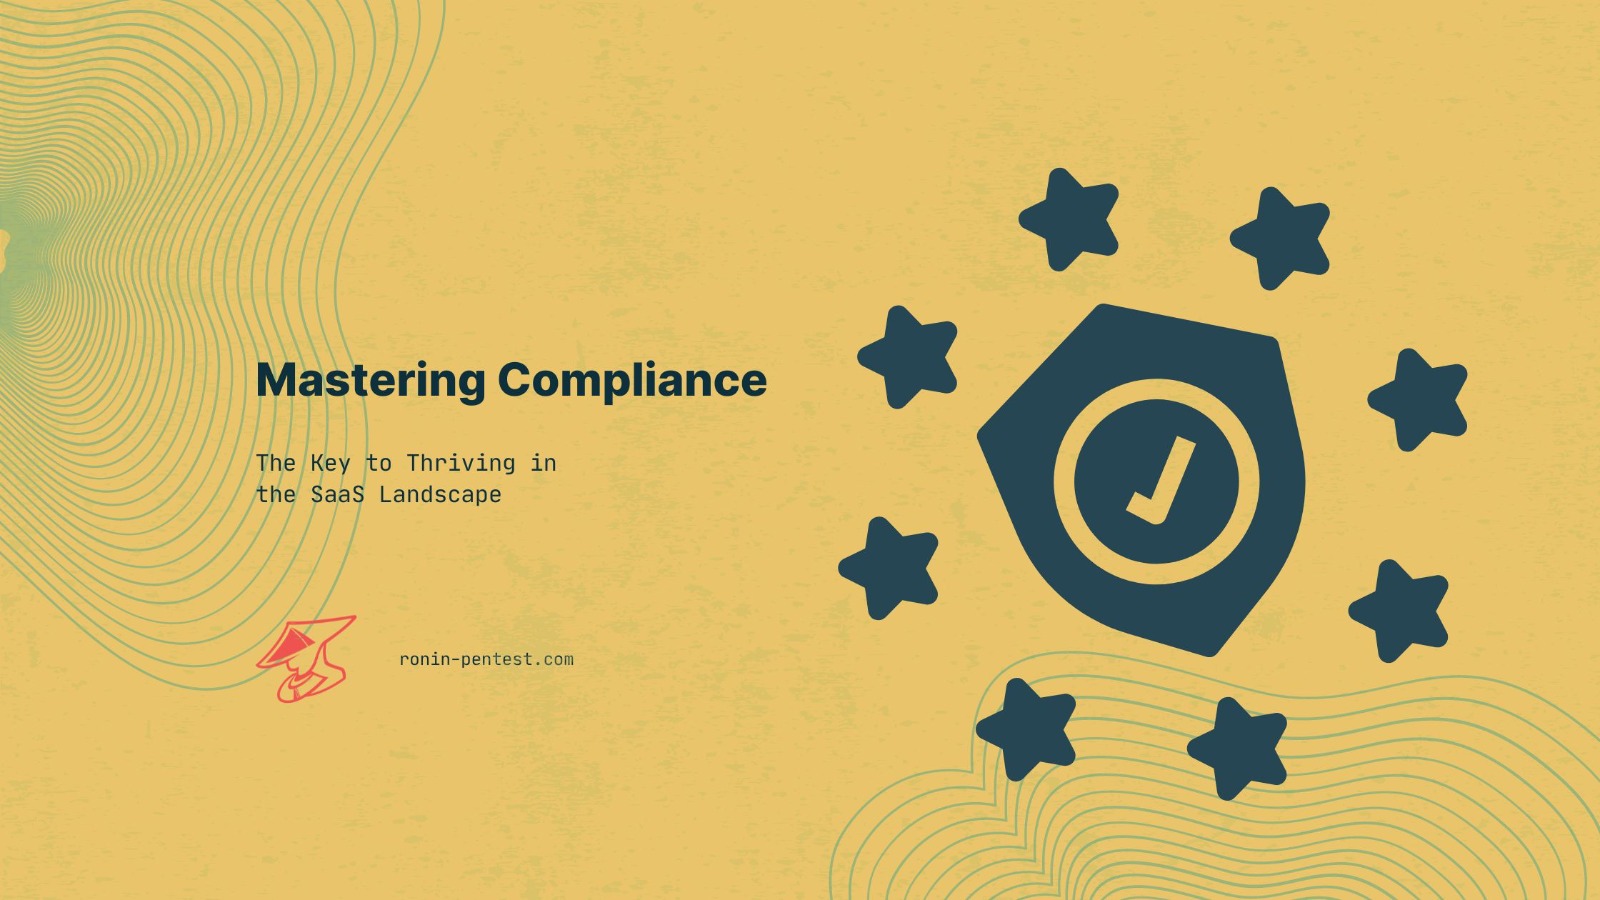 Ronin-Pentest | Mastering Compliance: The Key to Thriving in the SaaS Landscape